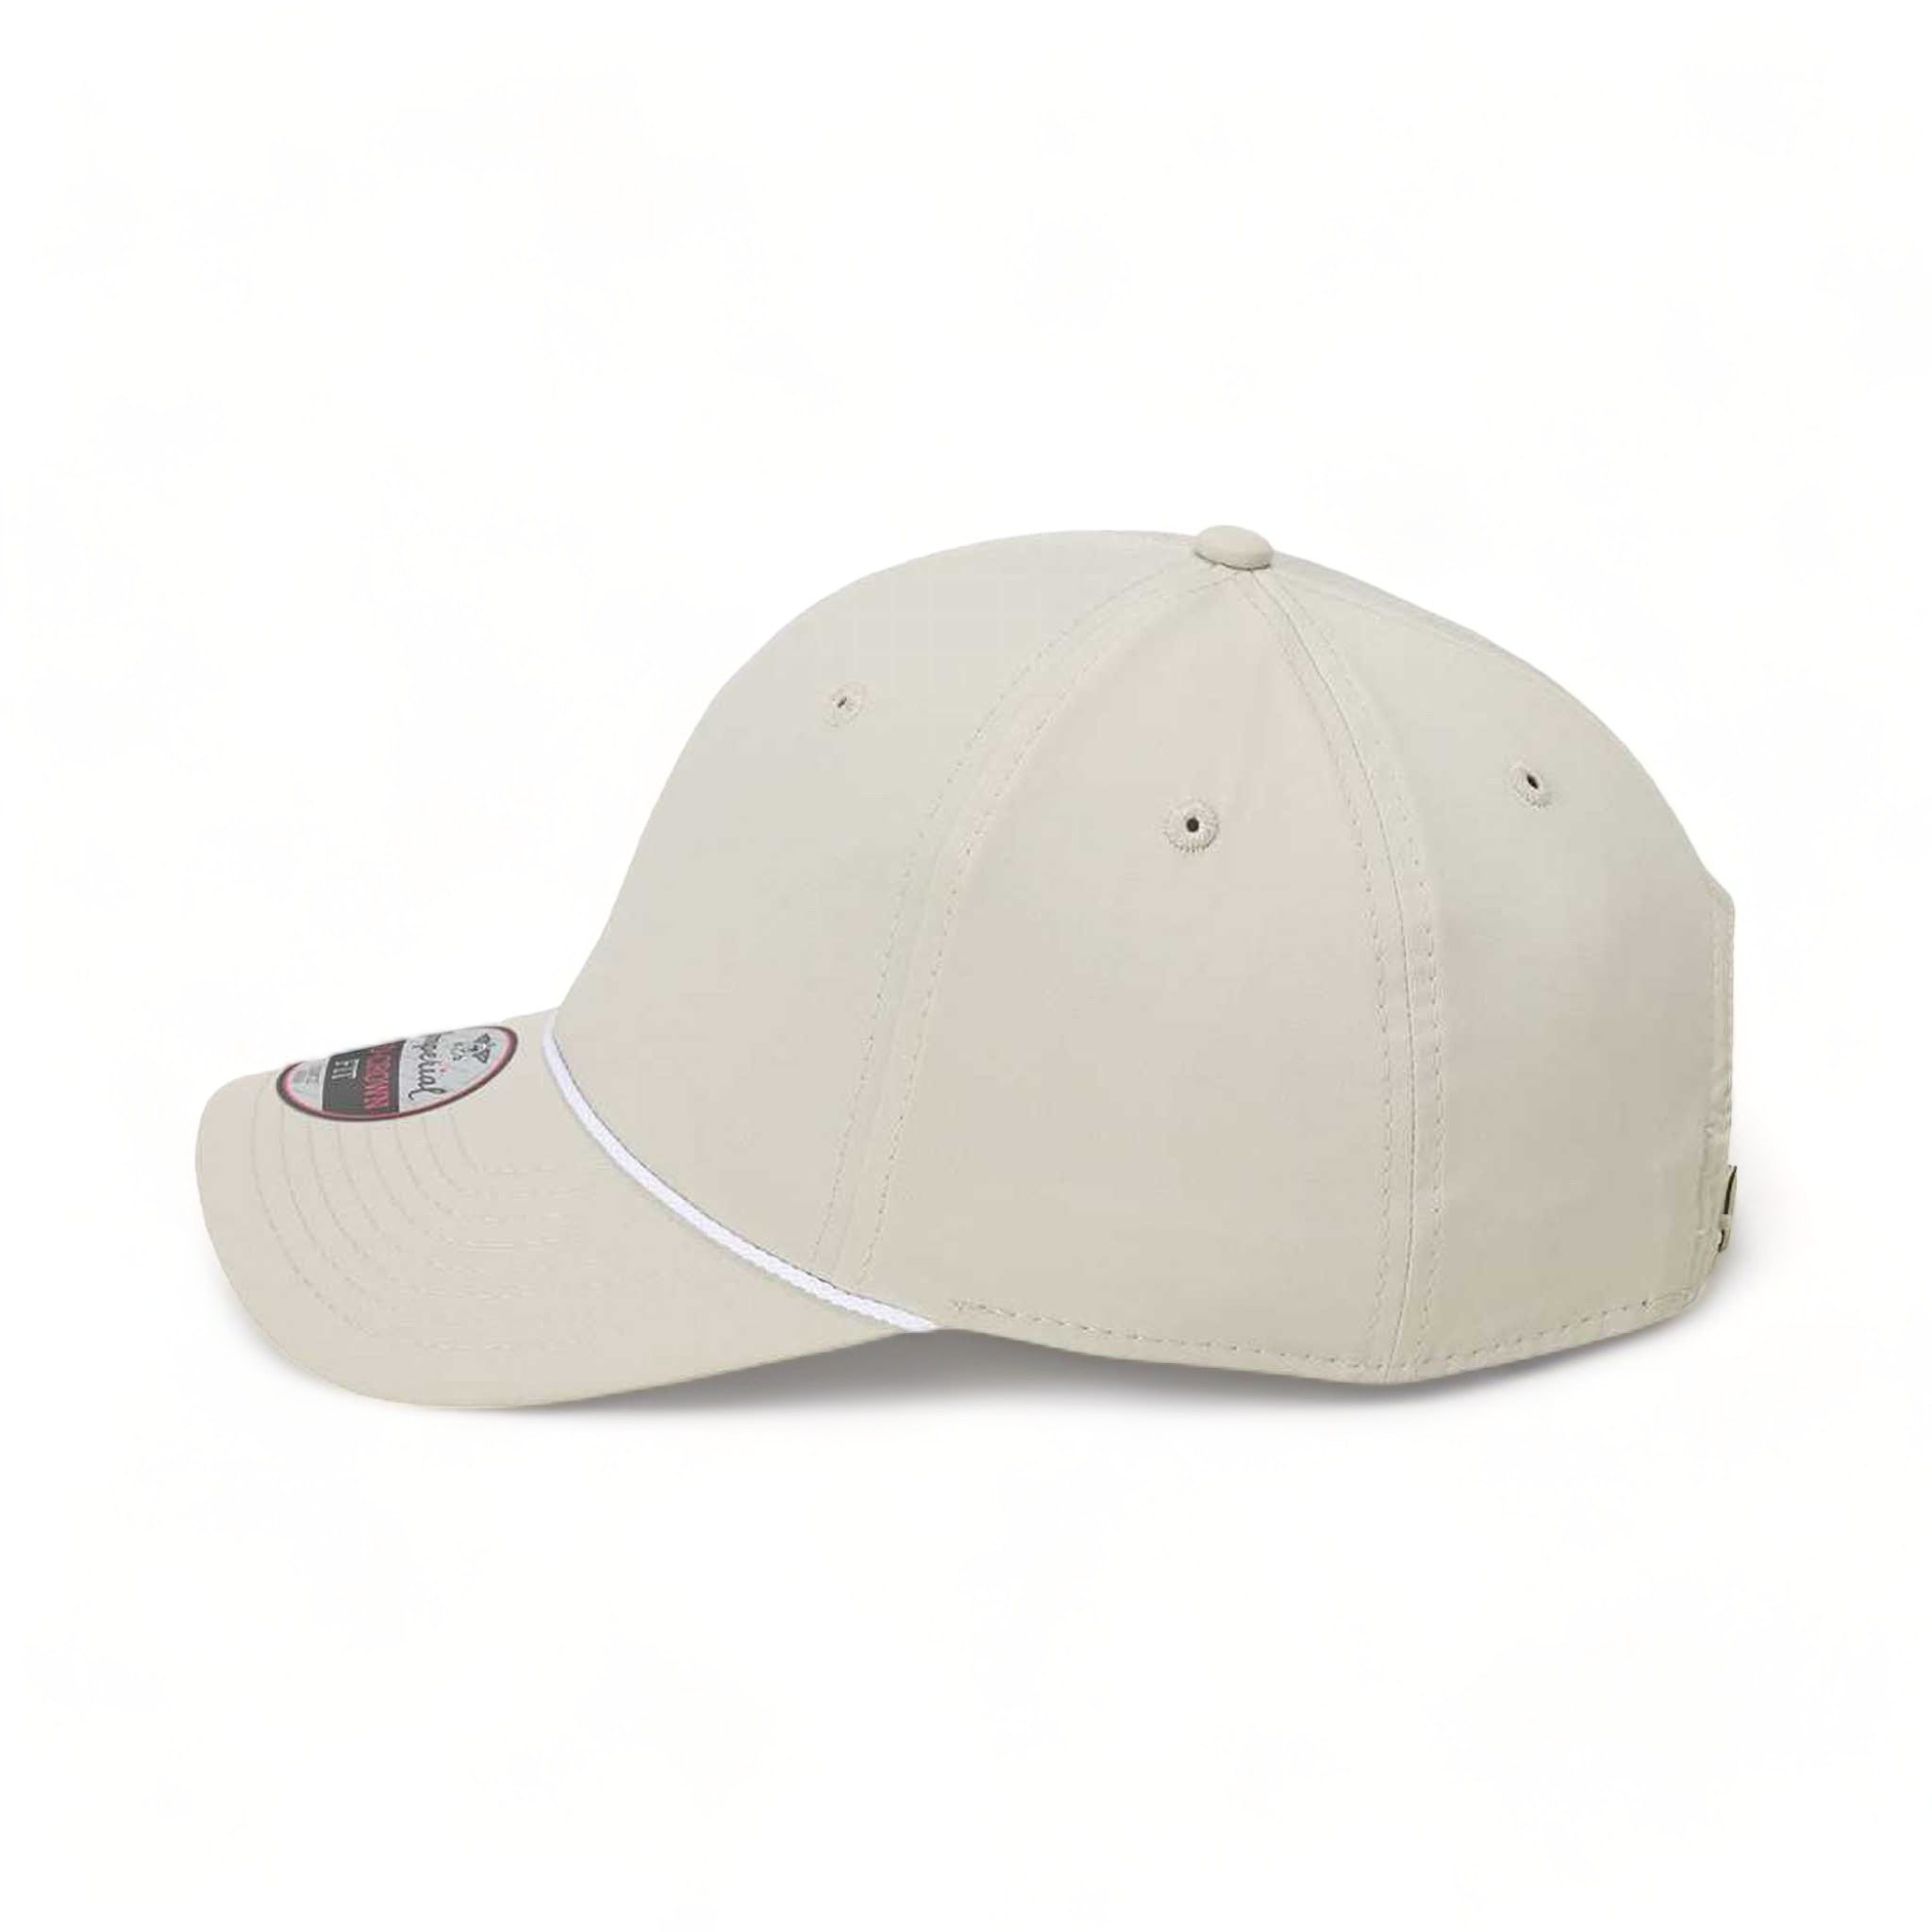 Side view of Imperial 7054 custom hat in putty and white